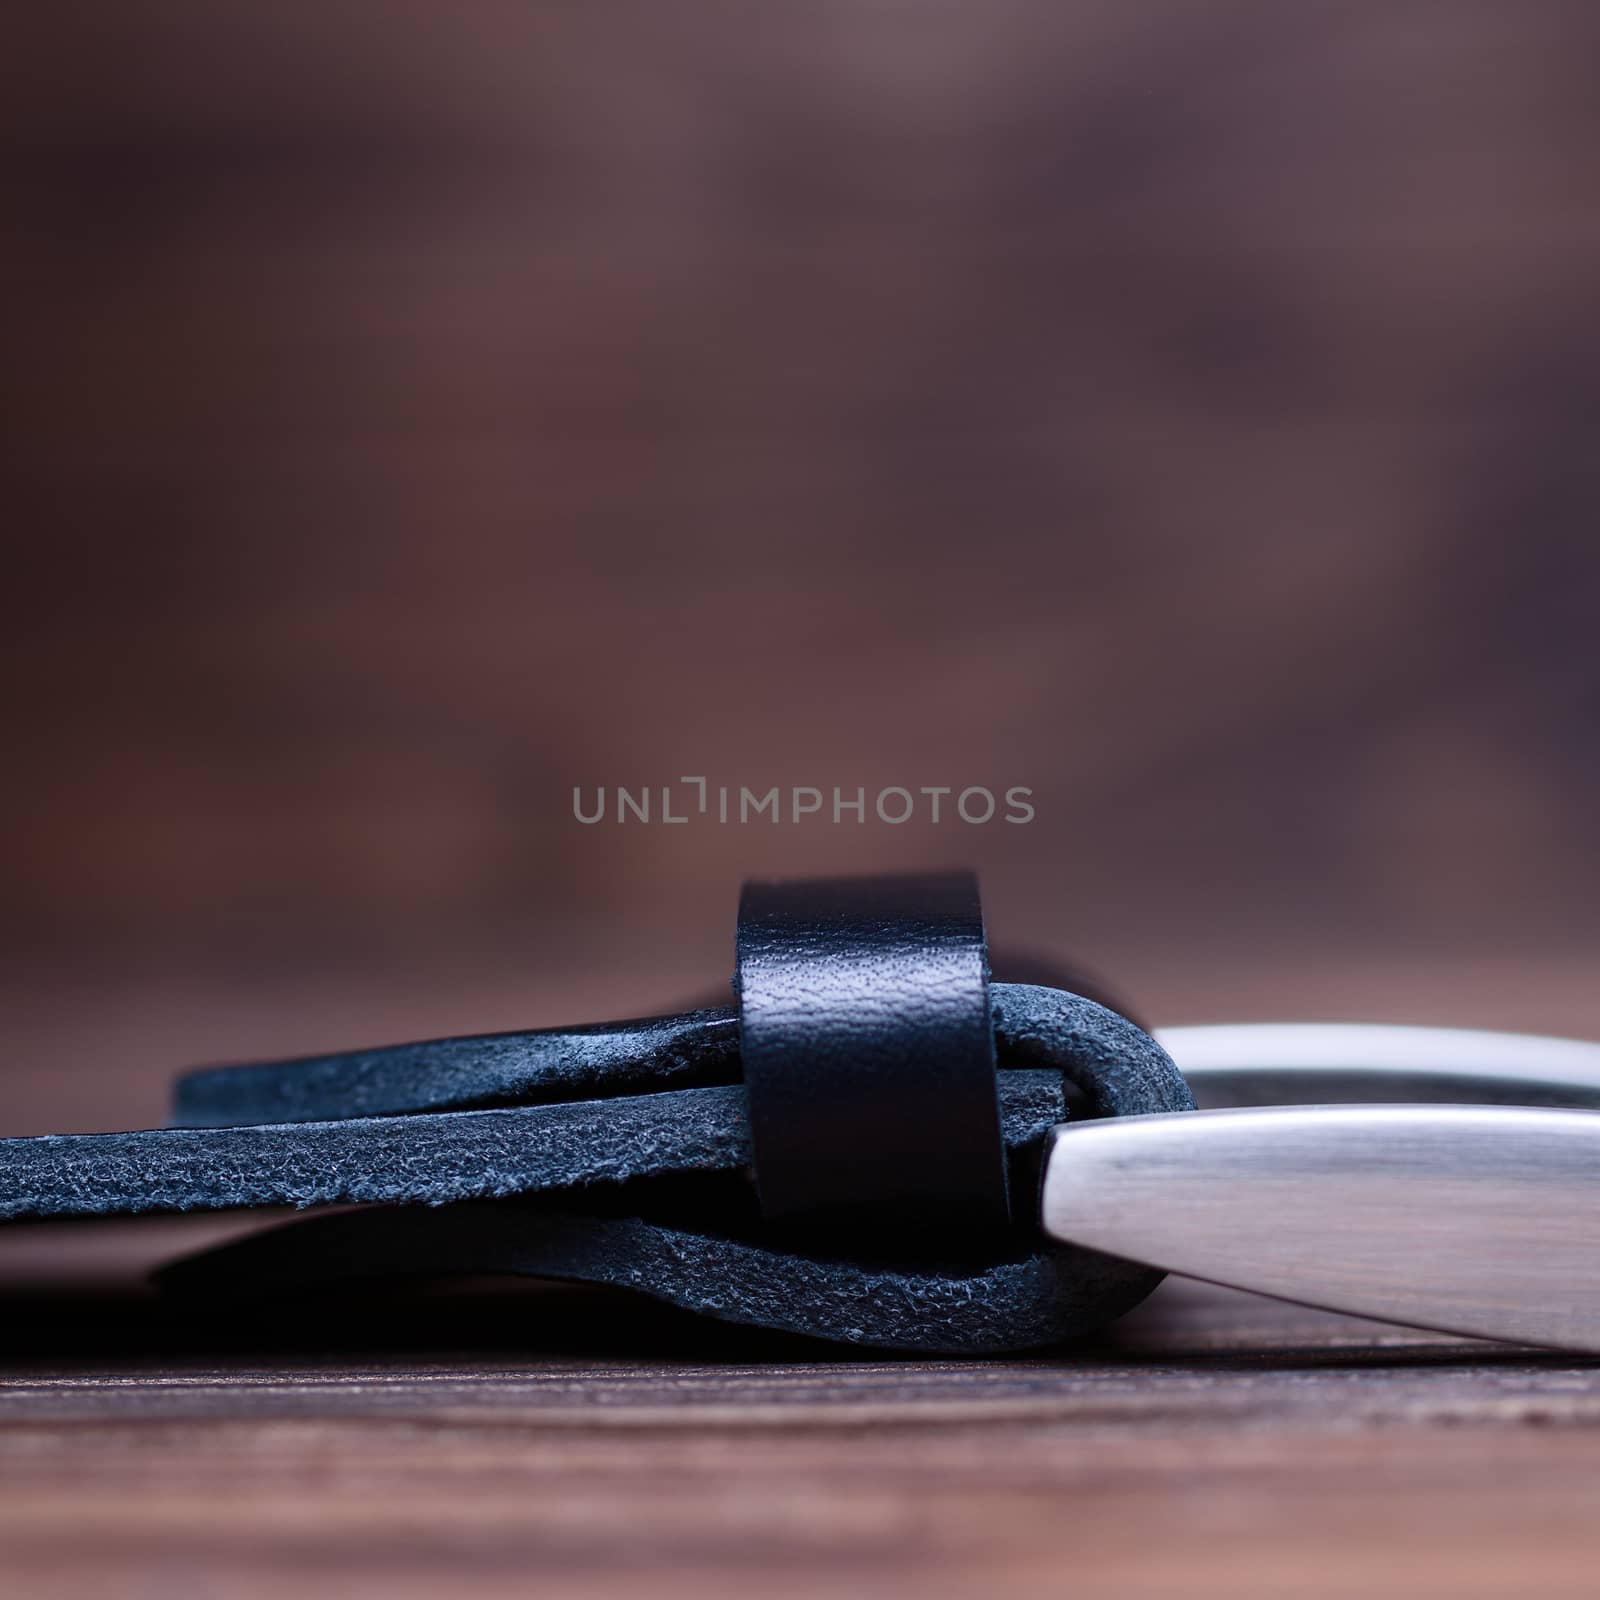 Black handmade belt buckle lies on textured wooden background closeup. Side view. Stock photo of businessman accessories with blurred background.